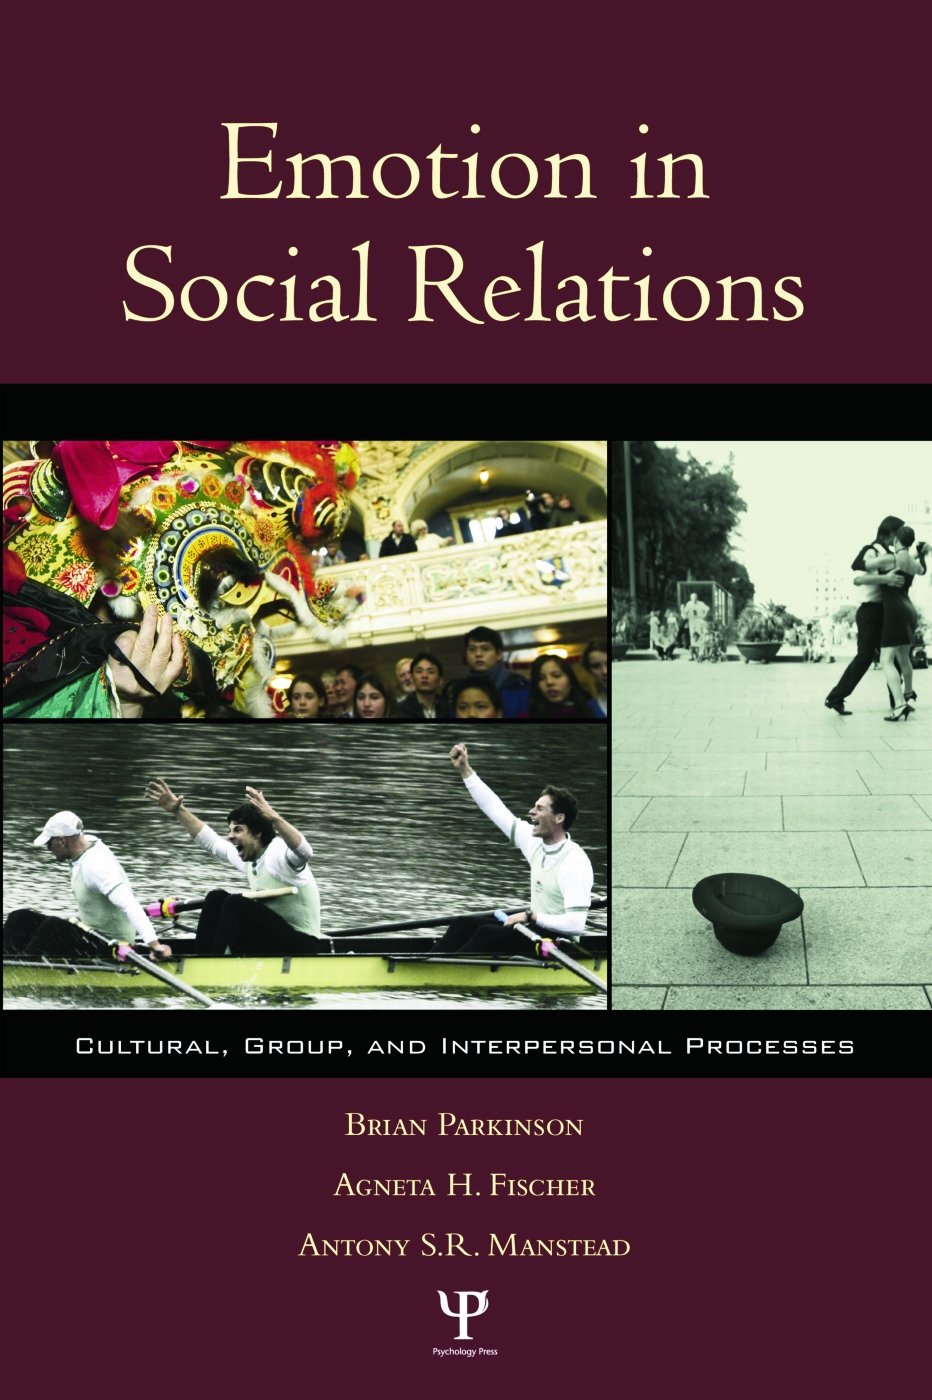 Emotion in Social Relations: Cultural, Group, and Interpersonal Perspectives